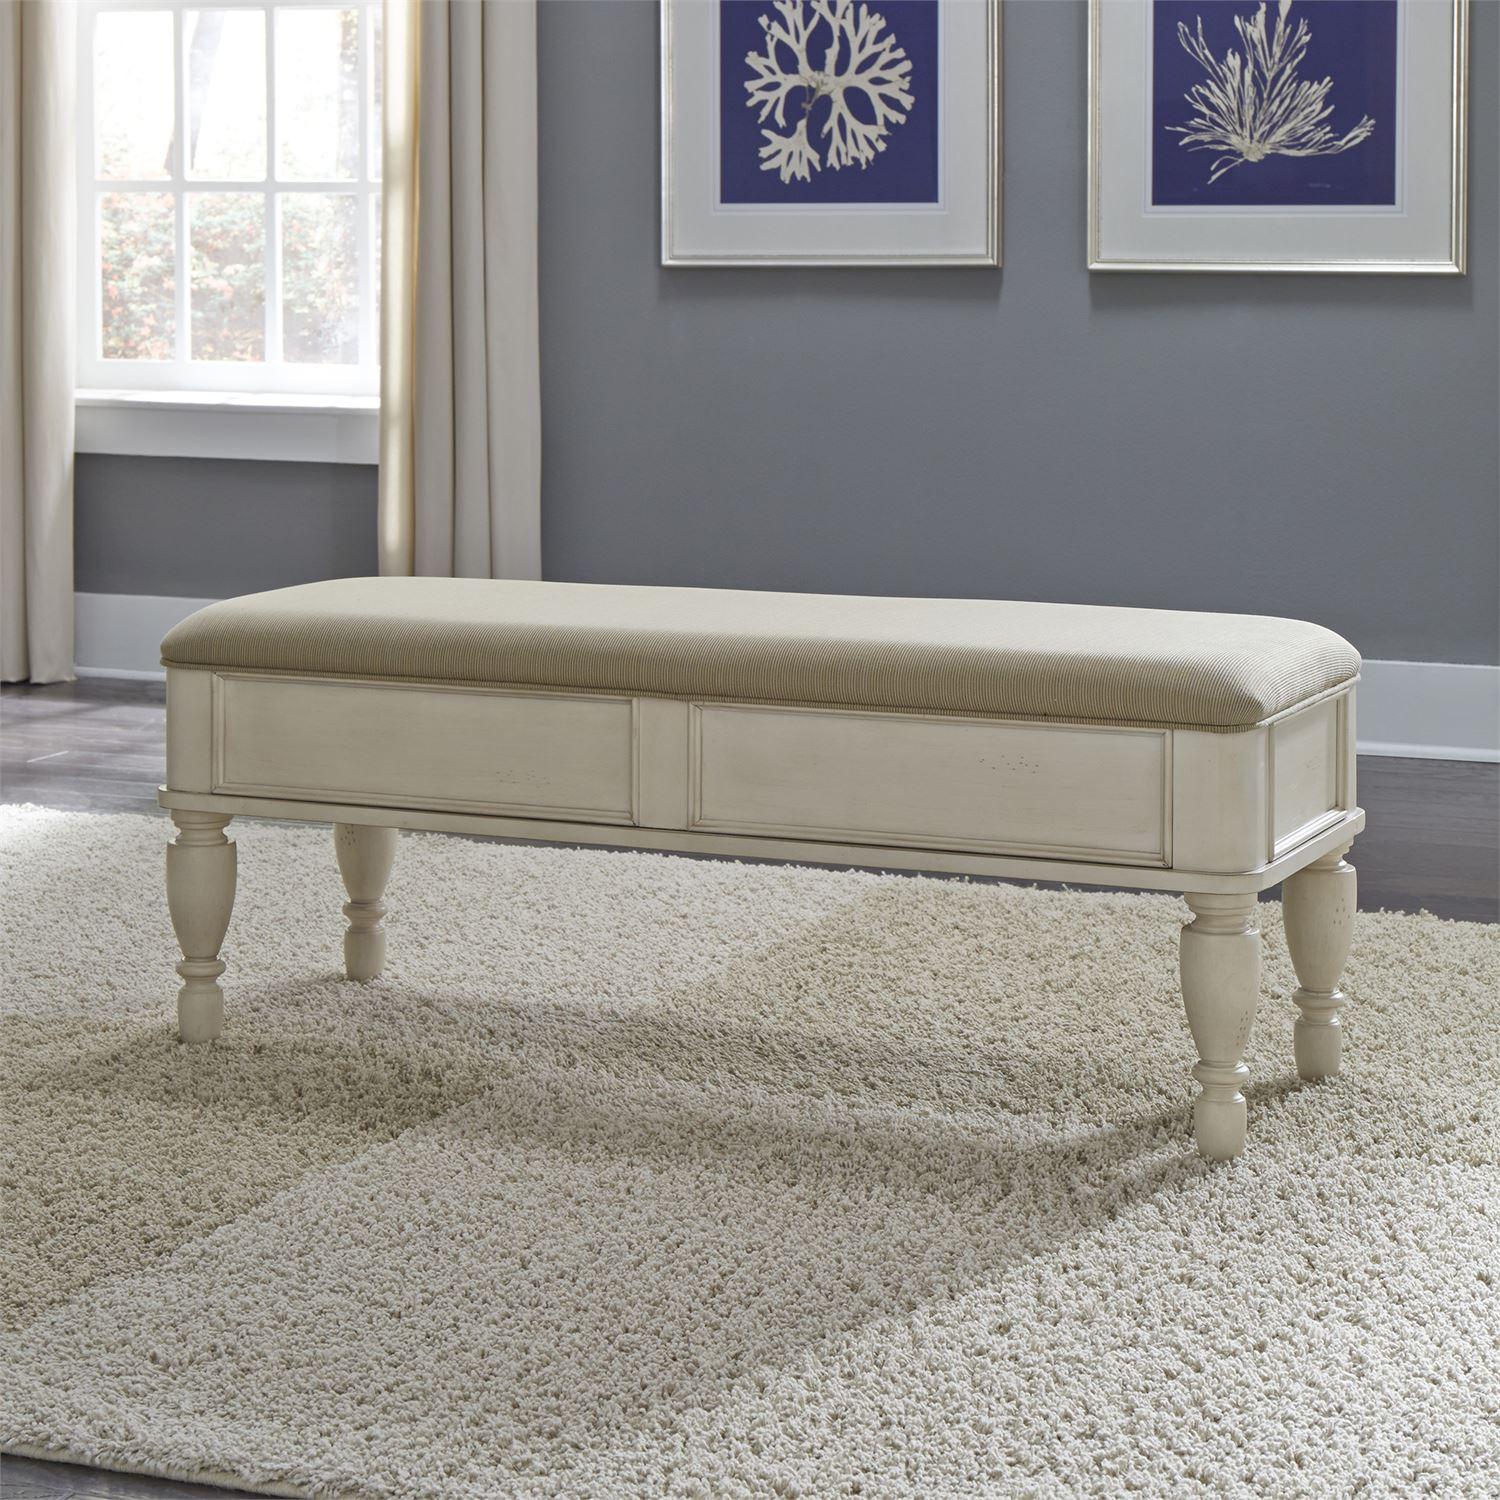 Traditional Bench Rustic Traditions II  (689-BR) Bench 689-BR47 in White 